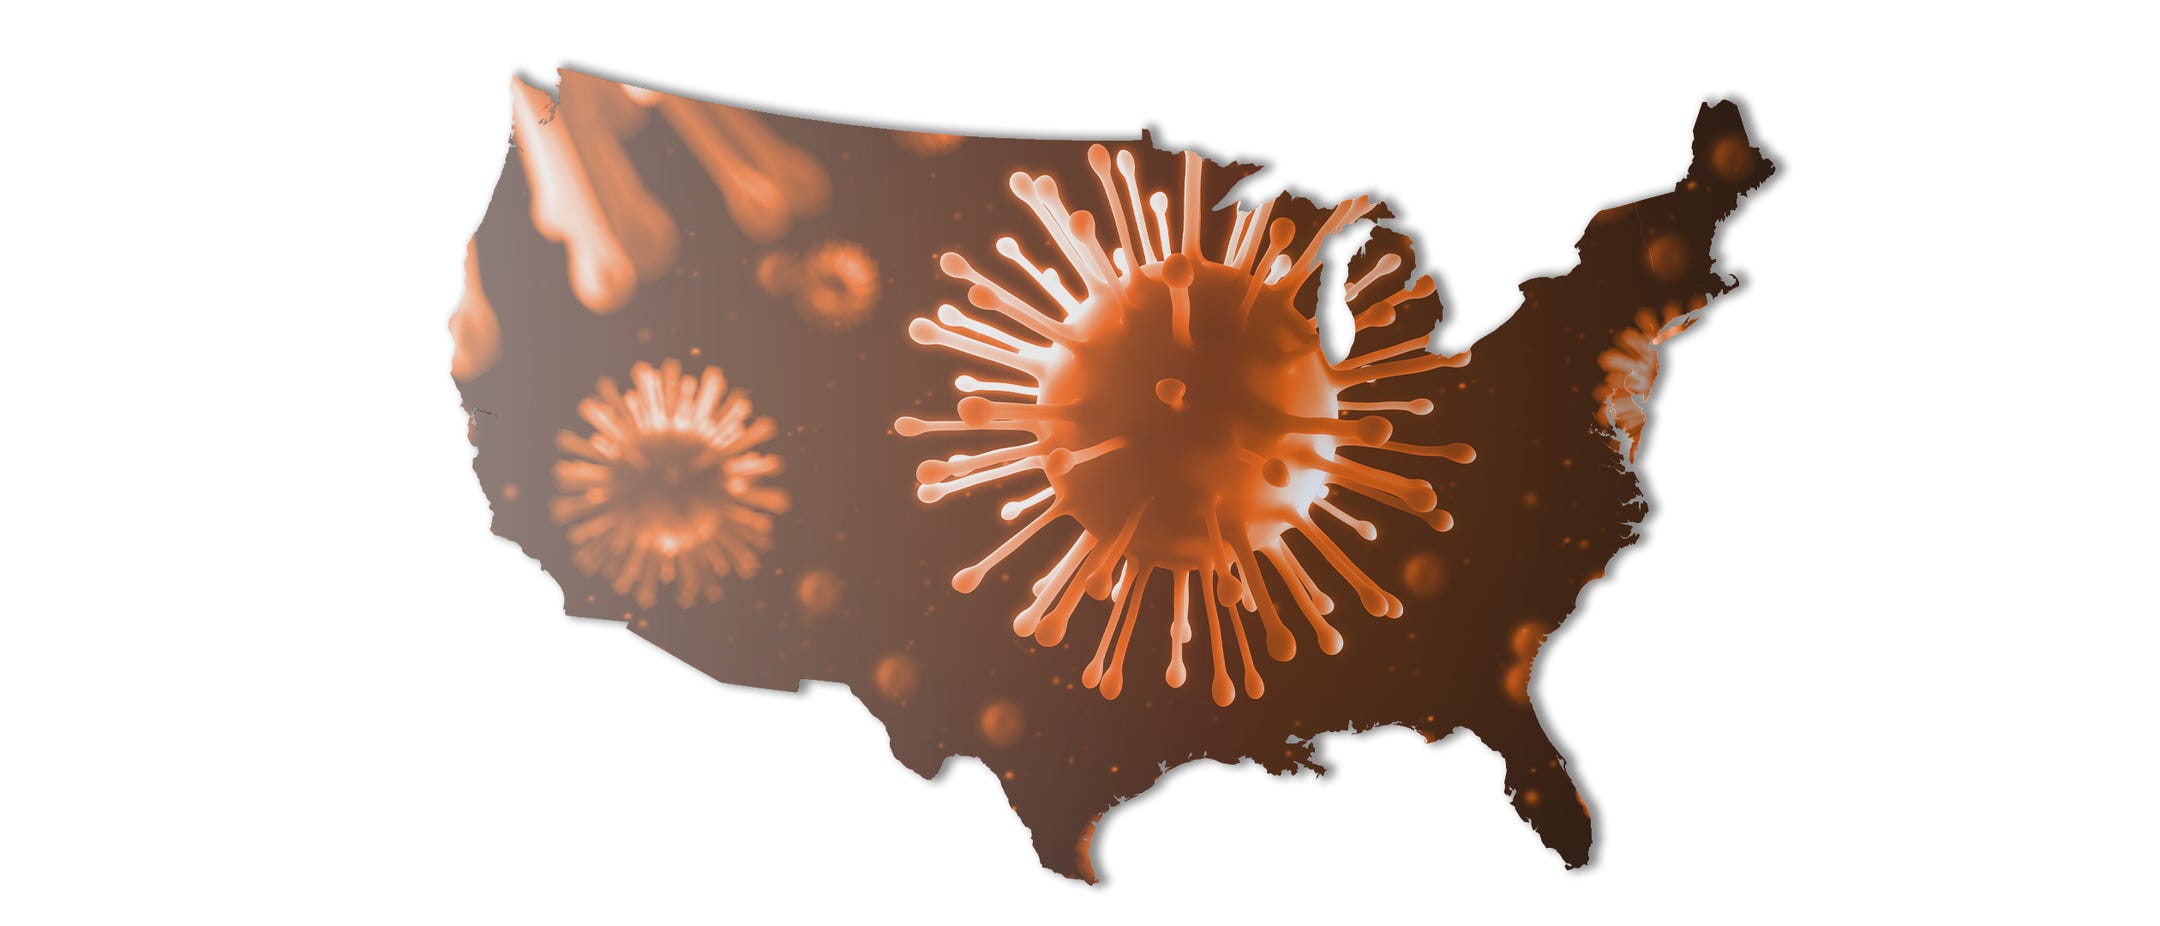 Coronavirus, explained: What to know about US cases, deaths, stimulus